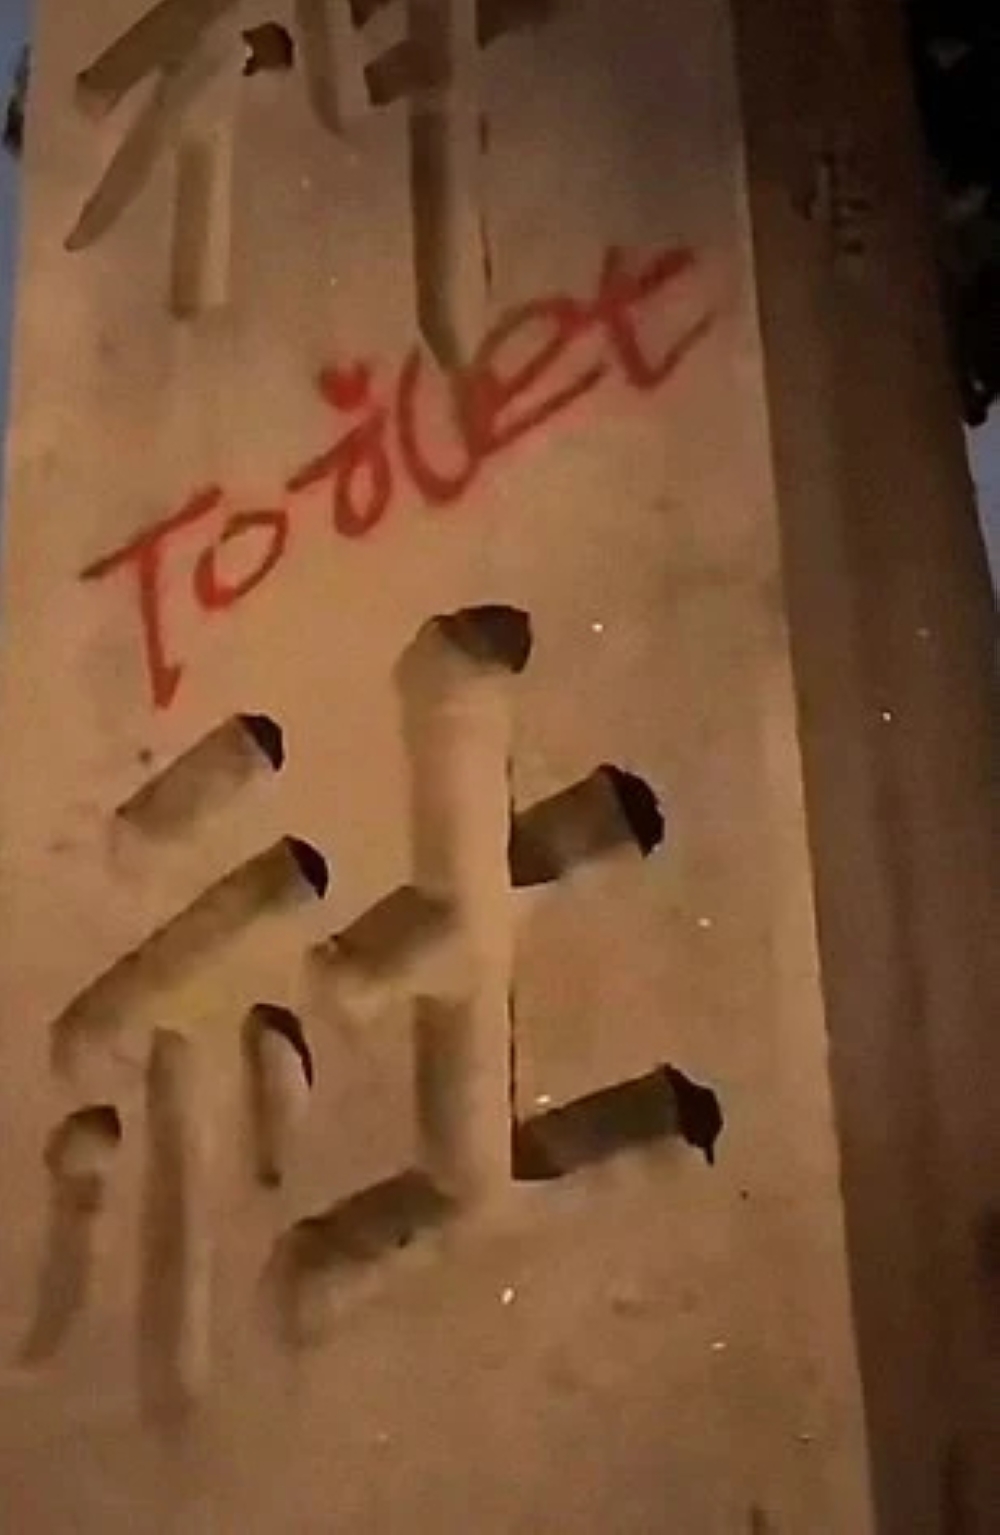 Jiang Zhuojun, together with Dong Guangming, allegedly spray-painted the word ‘toilet’ in red on a pillar of the shrine on May 31 while Xu Laiyu filmed them, a Tokyo metropolitan police spokesman said. — Picture from social media 